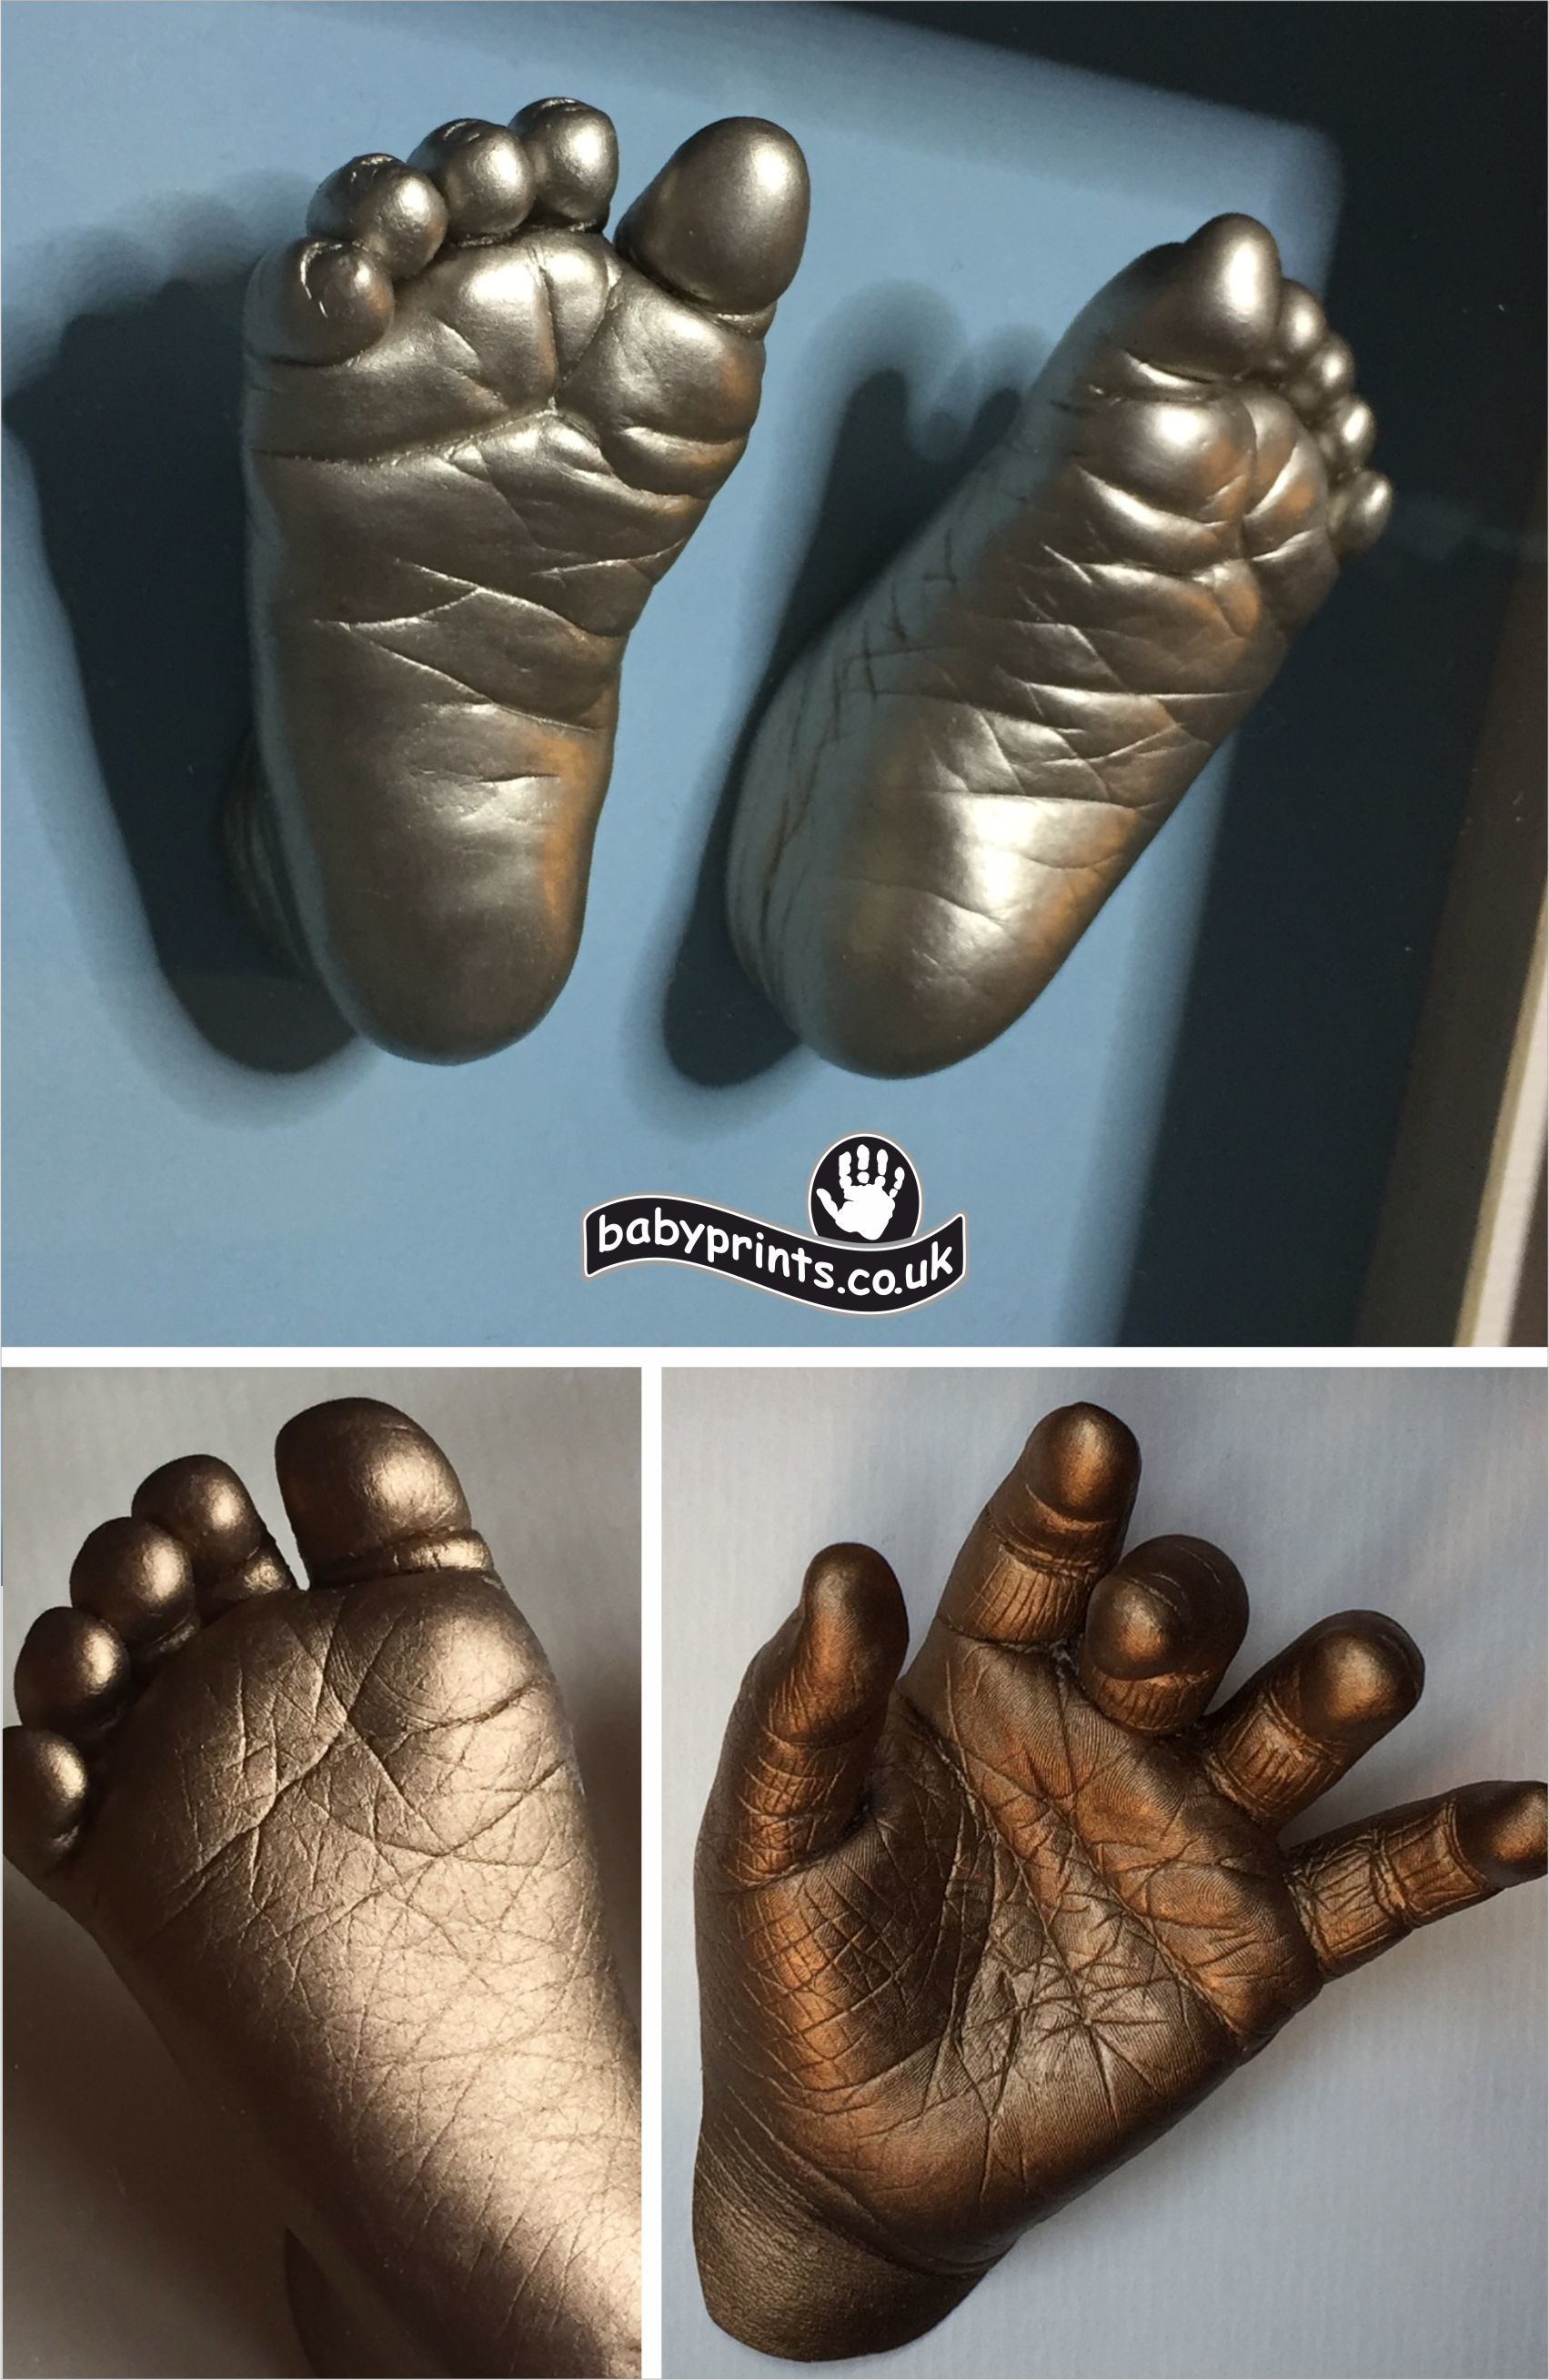 Stunning statues of Baby hands and feet